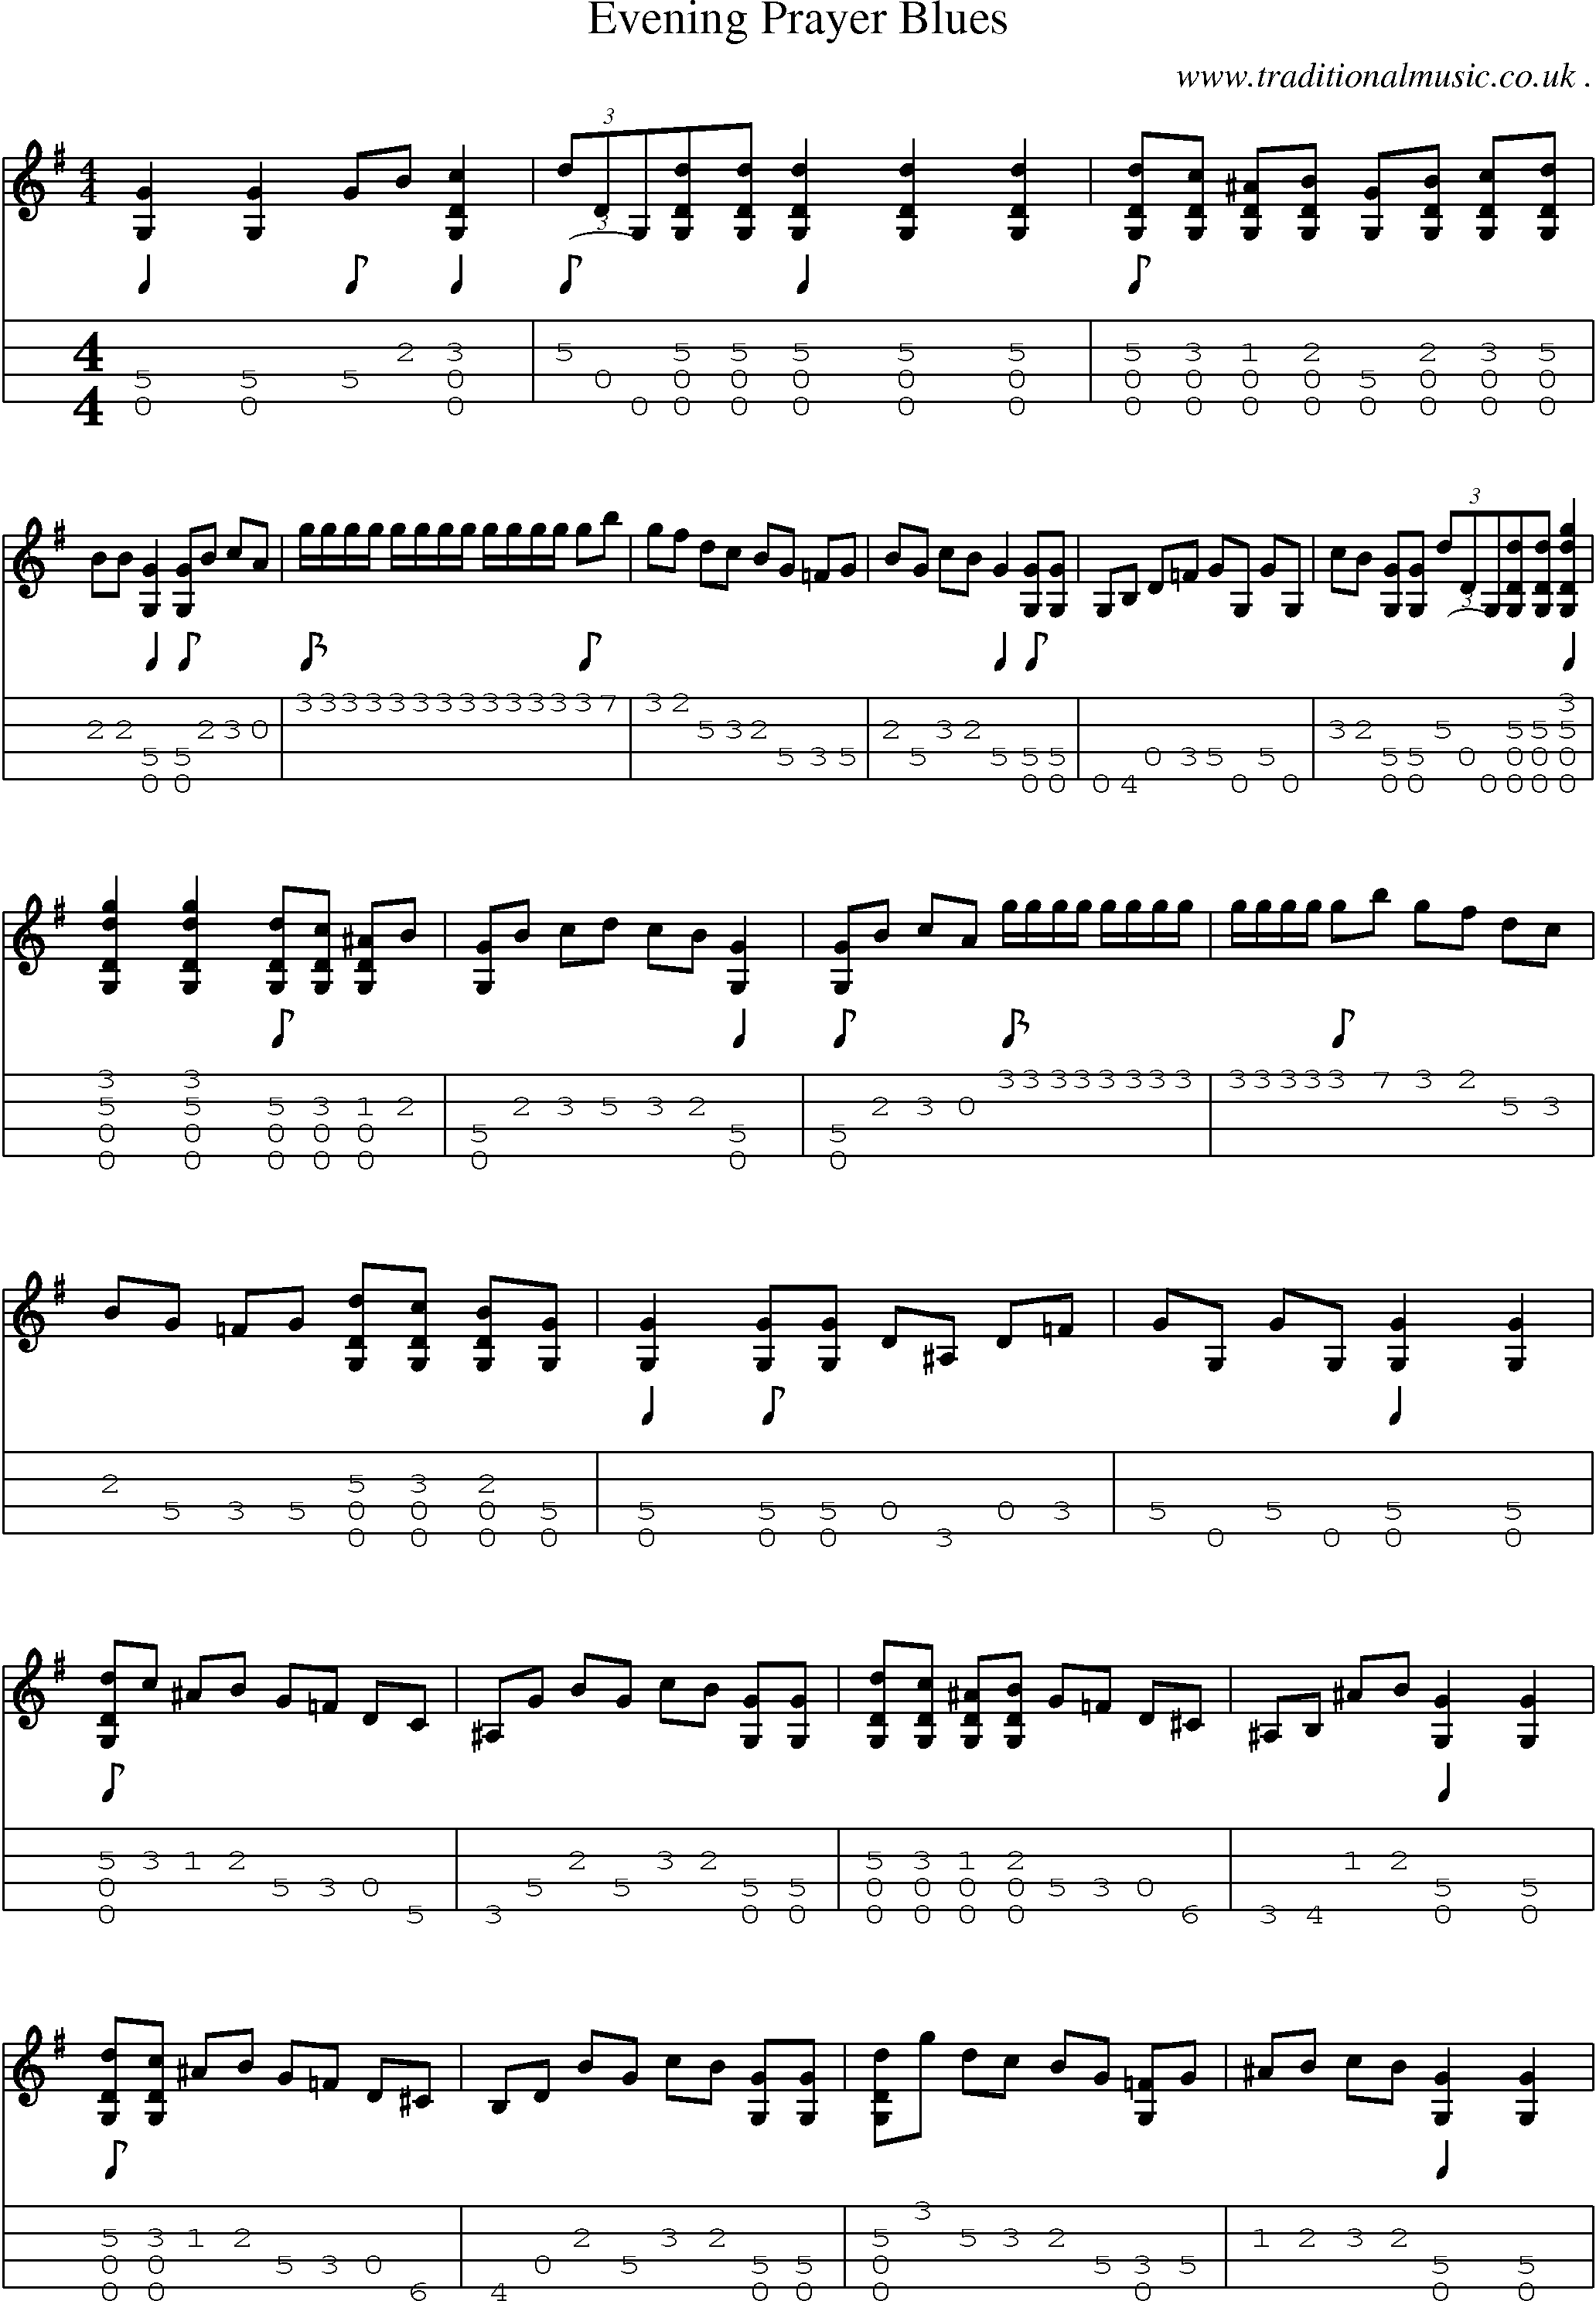 Music Score and Mandolin Tabs for Evening Prayer Blues